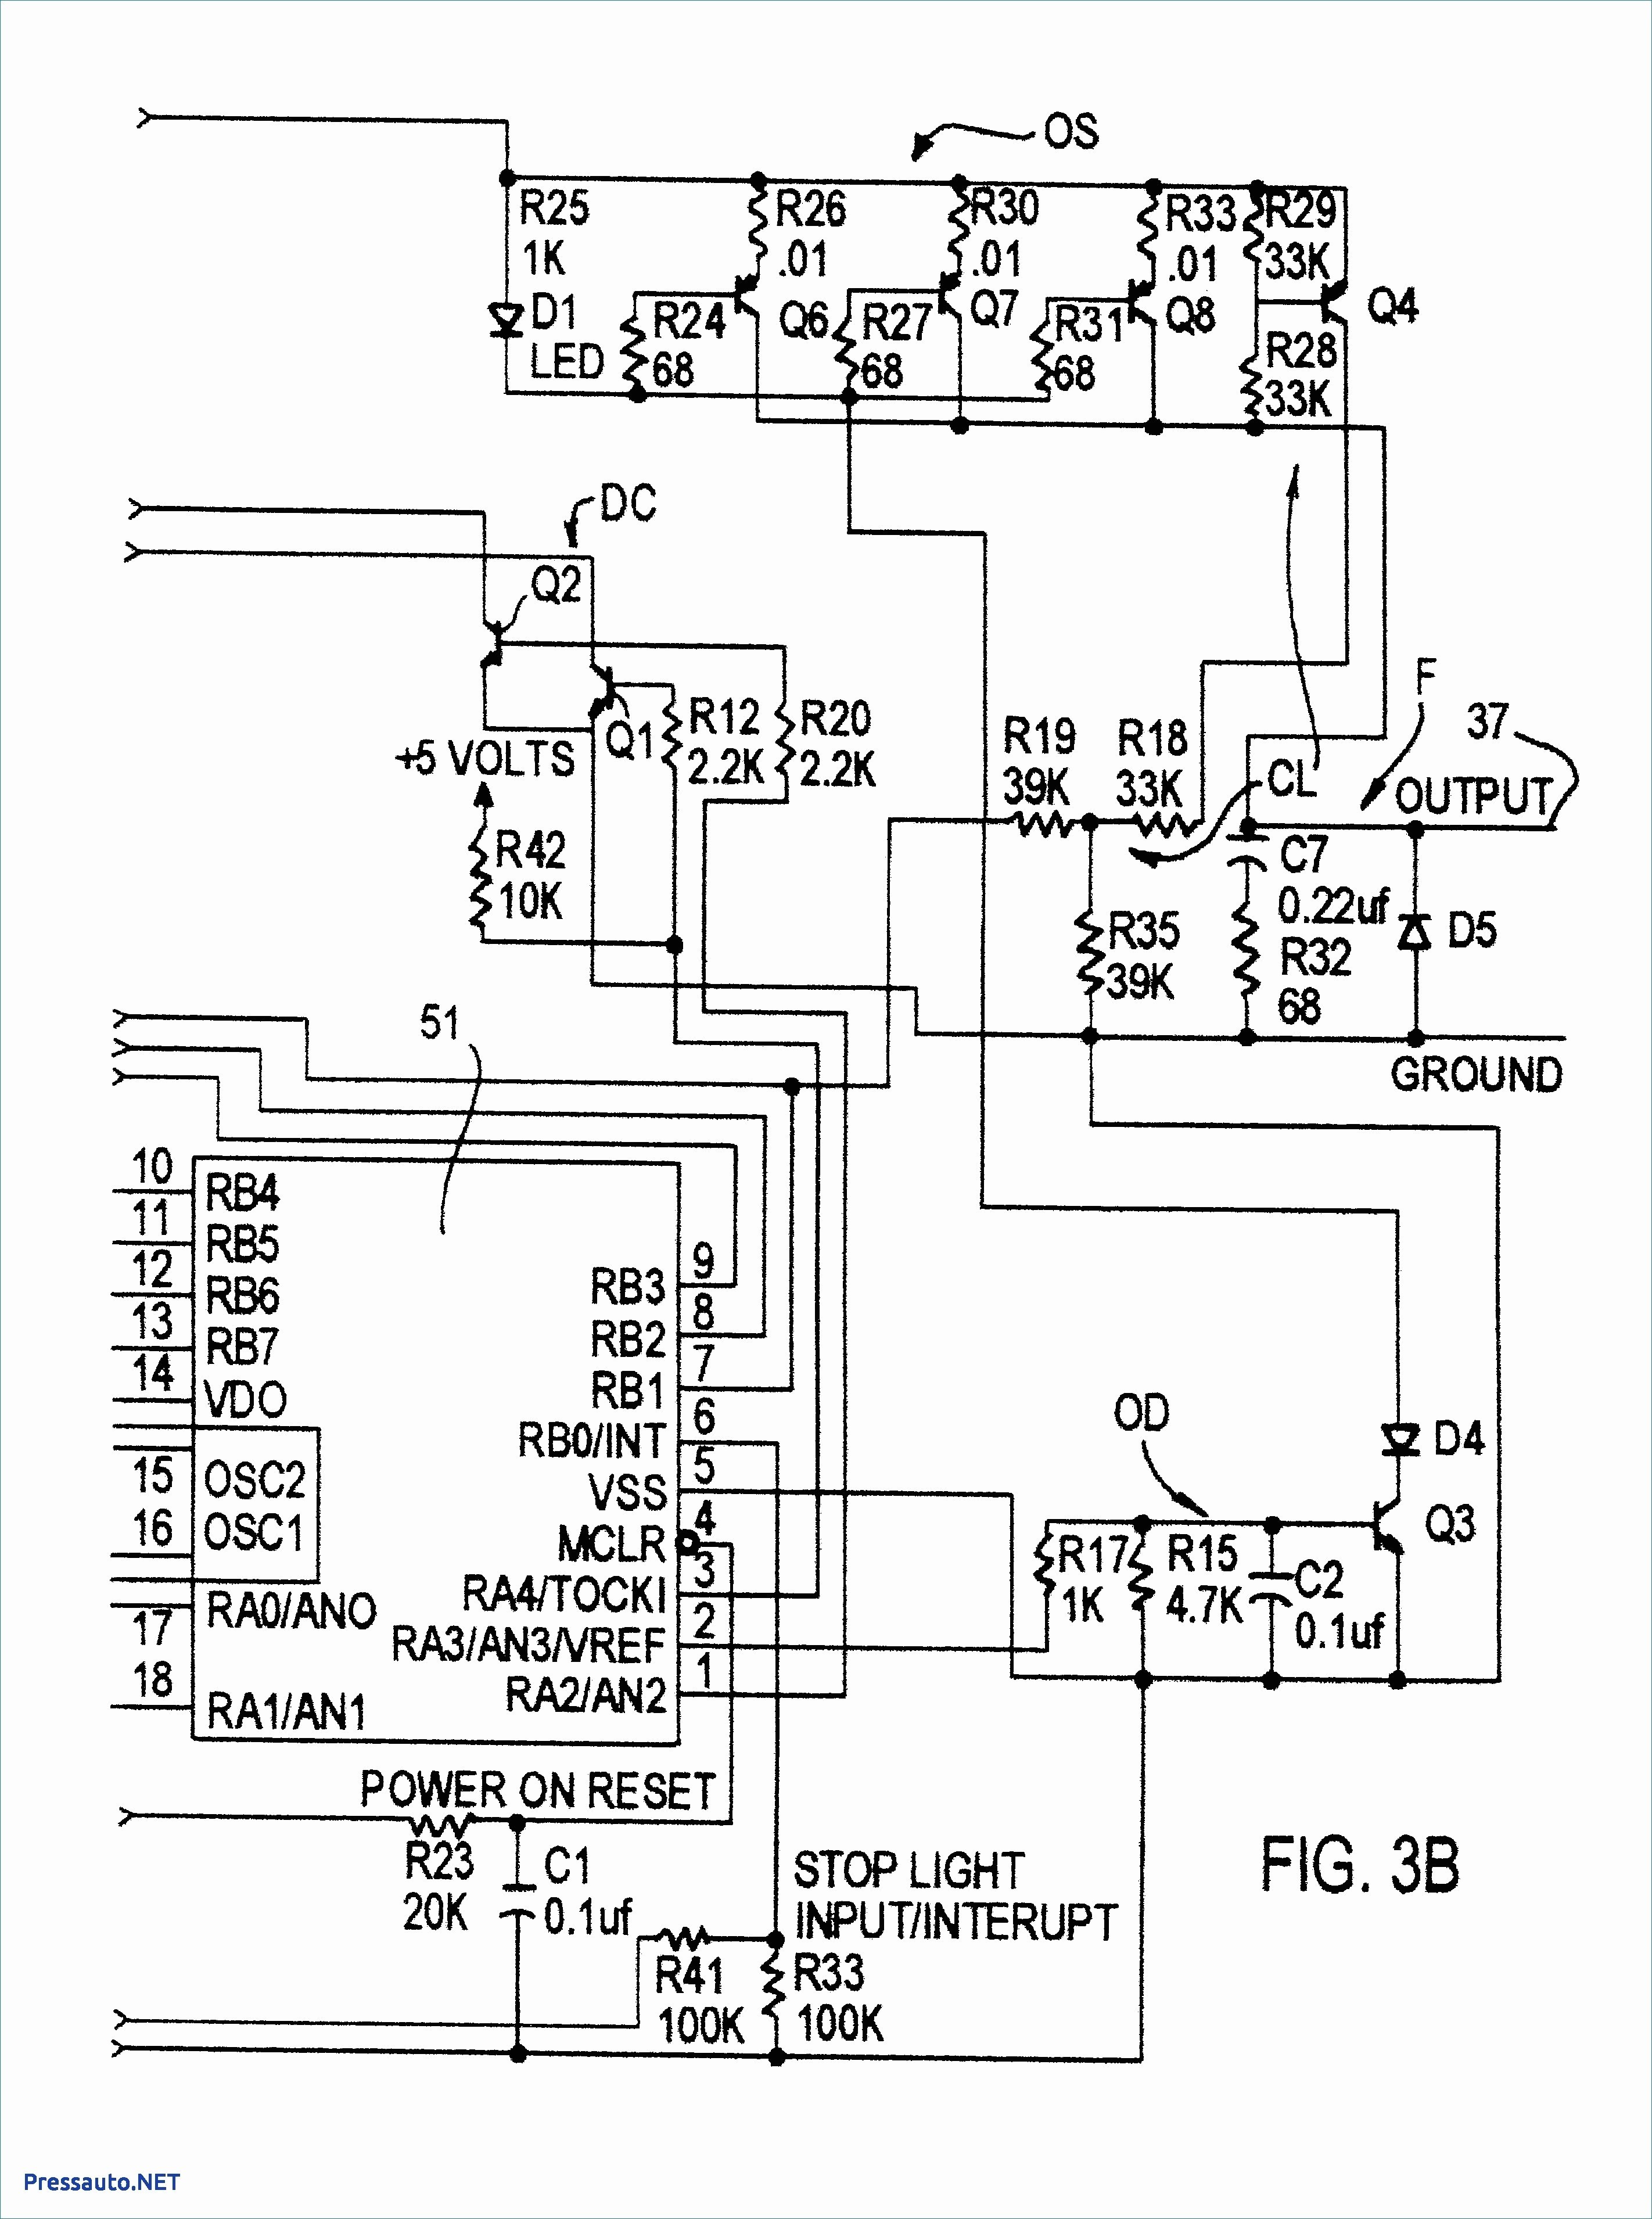 Rv Cable And Satellite Wiring Diagram Simple Rv Wiring Schematics Wiring Auto Wiring Diagrams Instructions